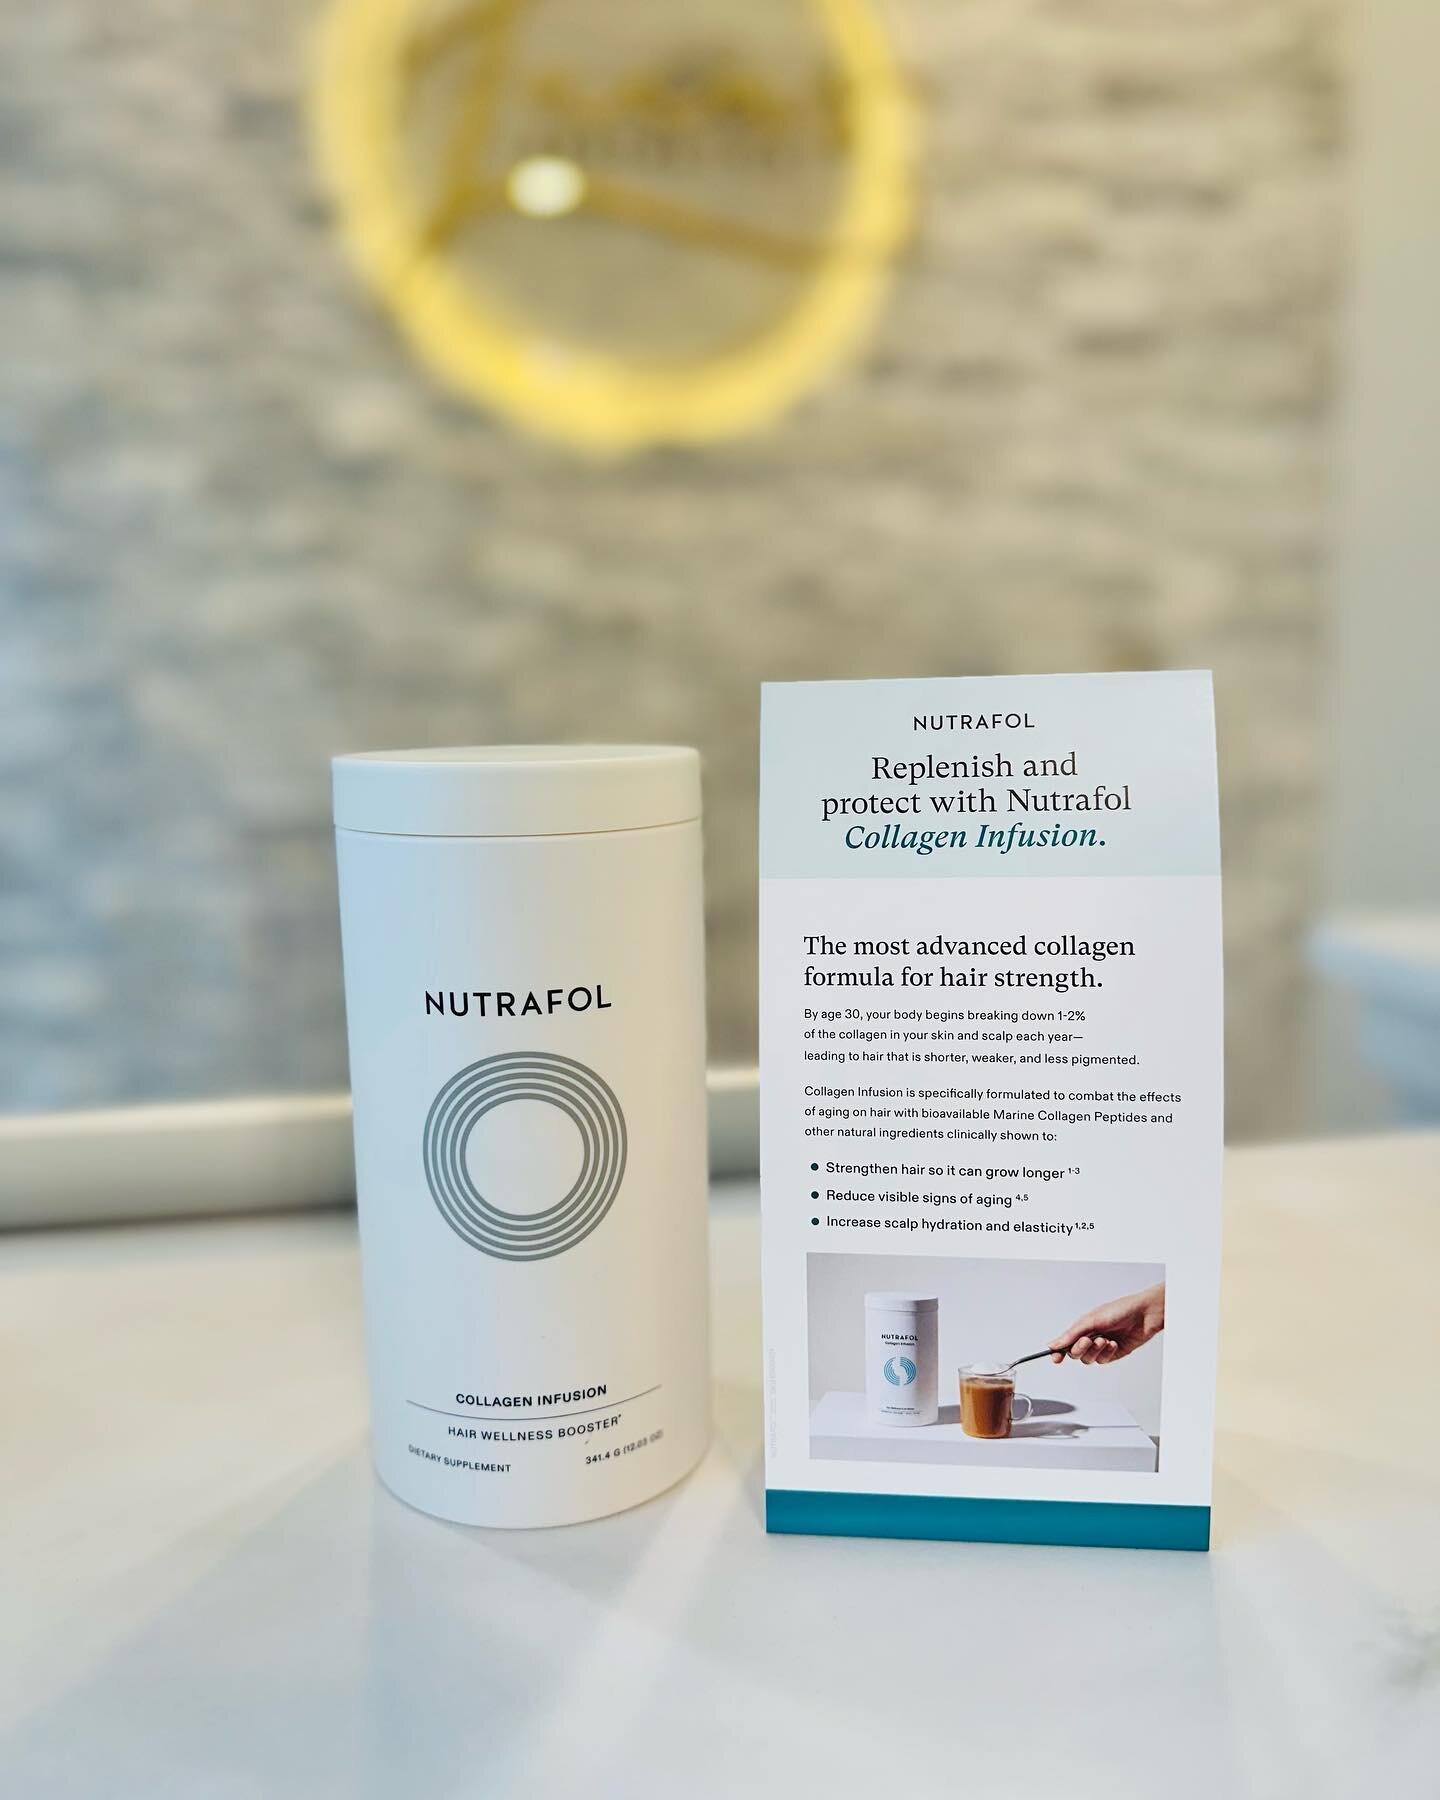 🔆Improve visible signs of aging and increase hydration and elasticity with Nutrafol Collagen Infusion! 🔆

A daily collagen peptide powder formulated to target aging as a root cause of thinning by replenishing lost collagen peptides to build stronge